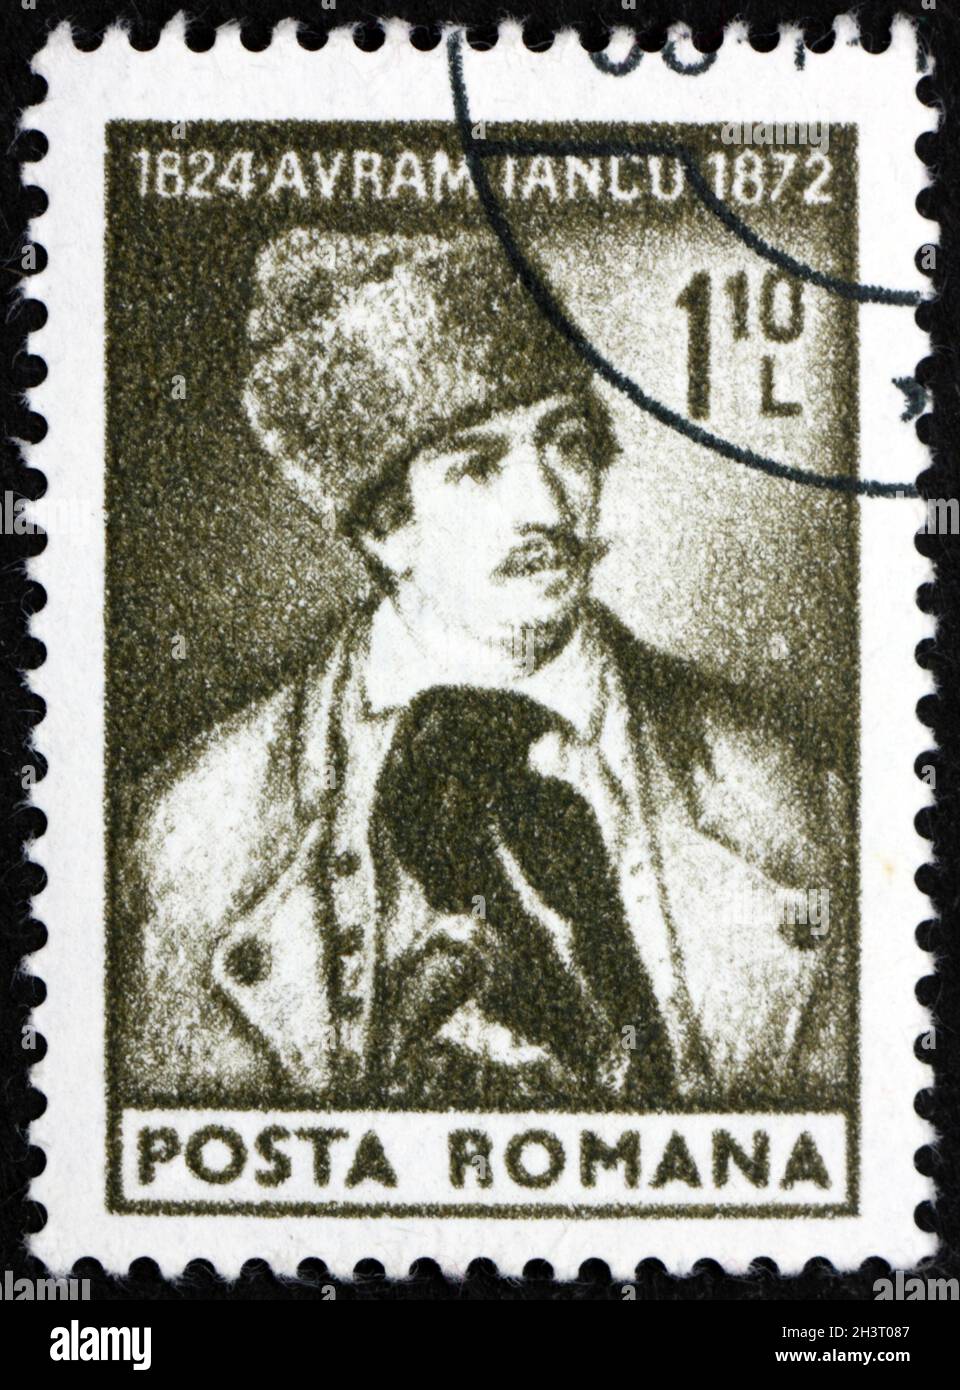 ROMANIA - CIRCA 1974: a stamp printed in Romania shows Avram Iancu (1824-1872), Romanian lawyer who played an important role in the local chapter of t Stock Photo